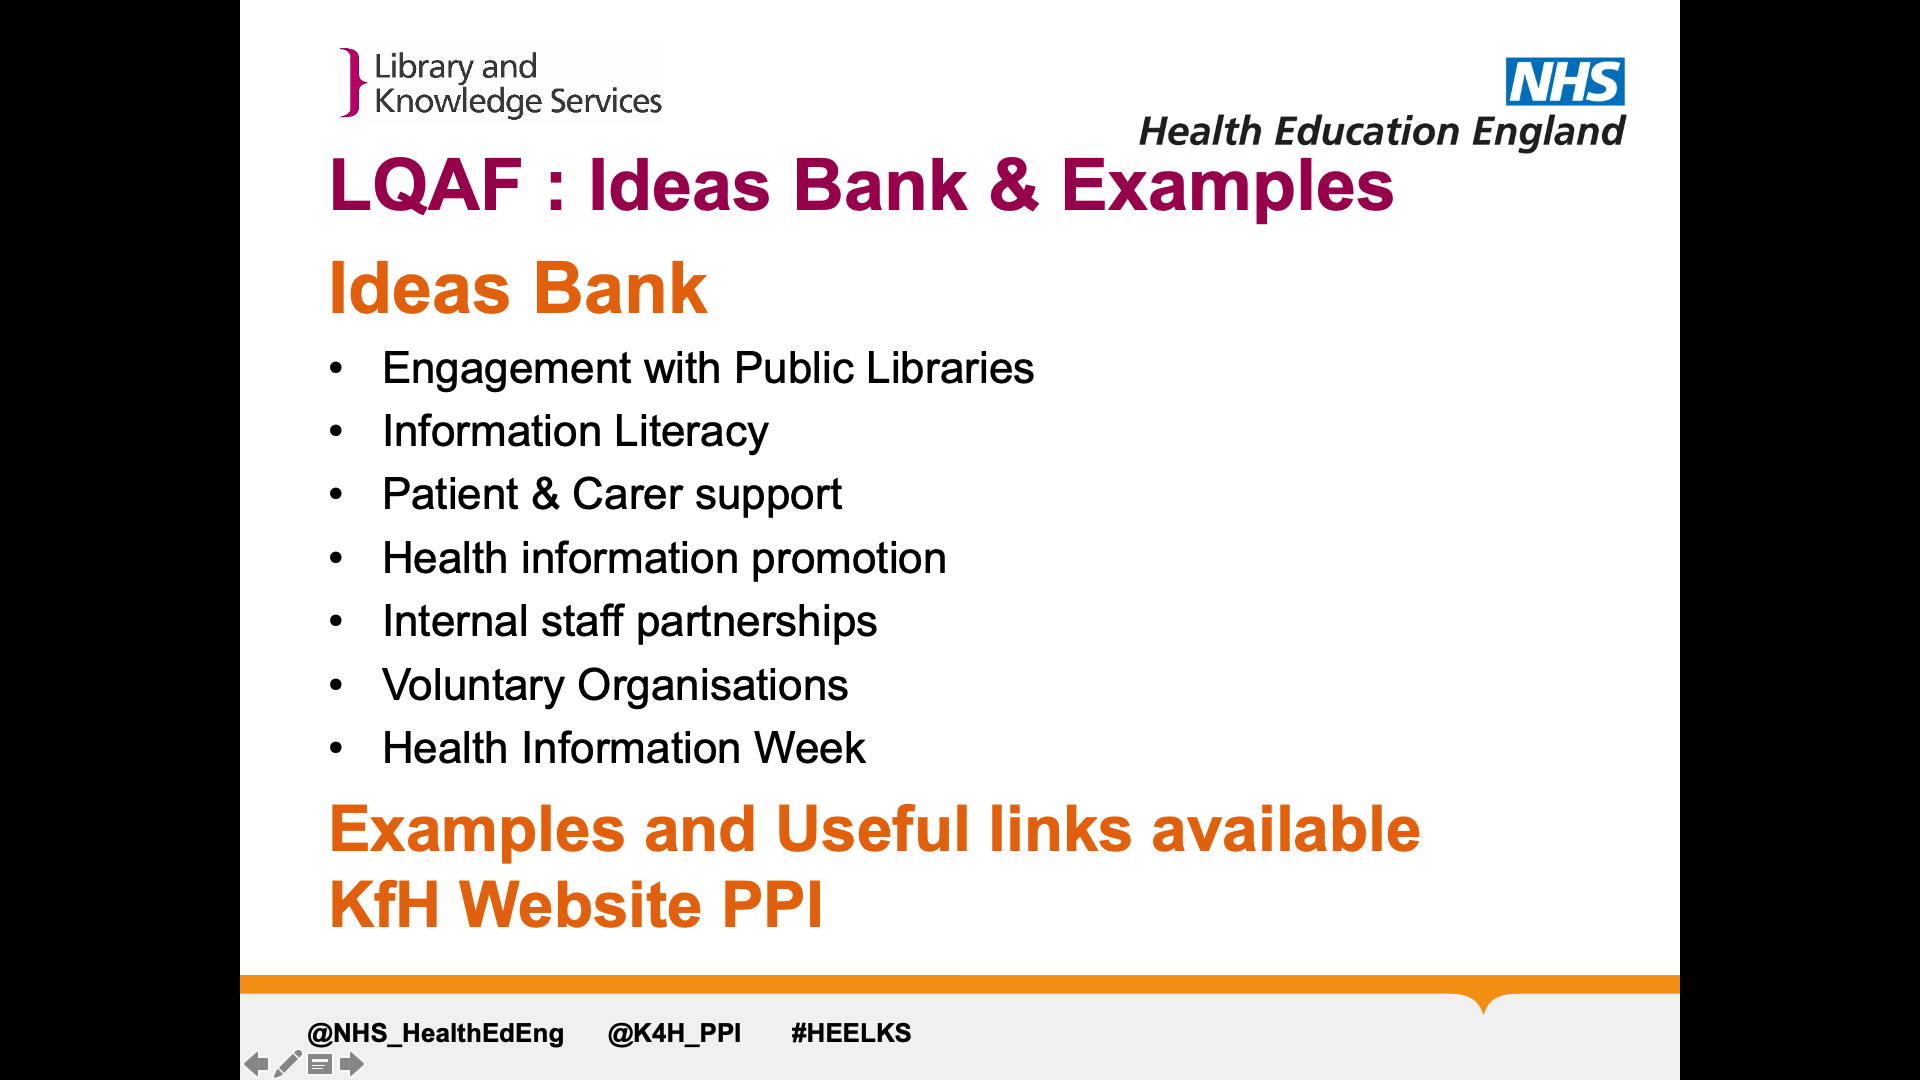 Title: LQAF : Ideas Bank & Examples. List under the header 'ideas bank': engagement with public libraries, information literacy, patient and carer support, health information promotion, internal staff partnerships, voluntary organisations, health information week. Further links can be found on the KfH website